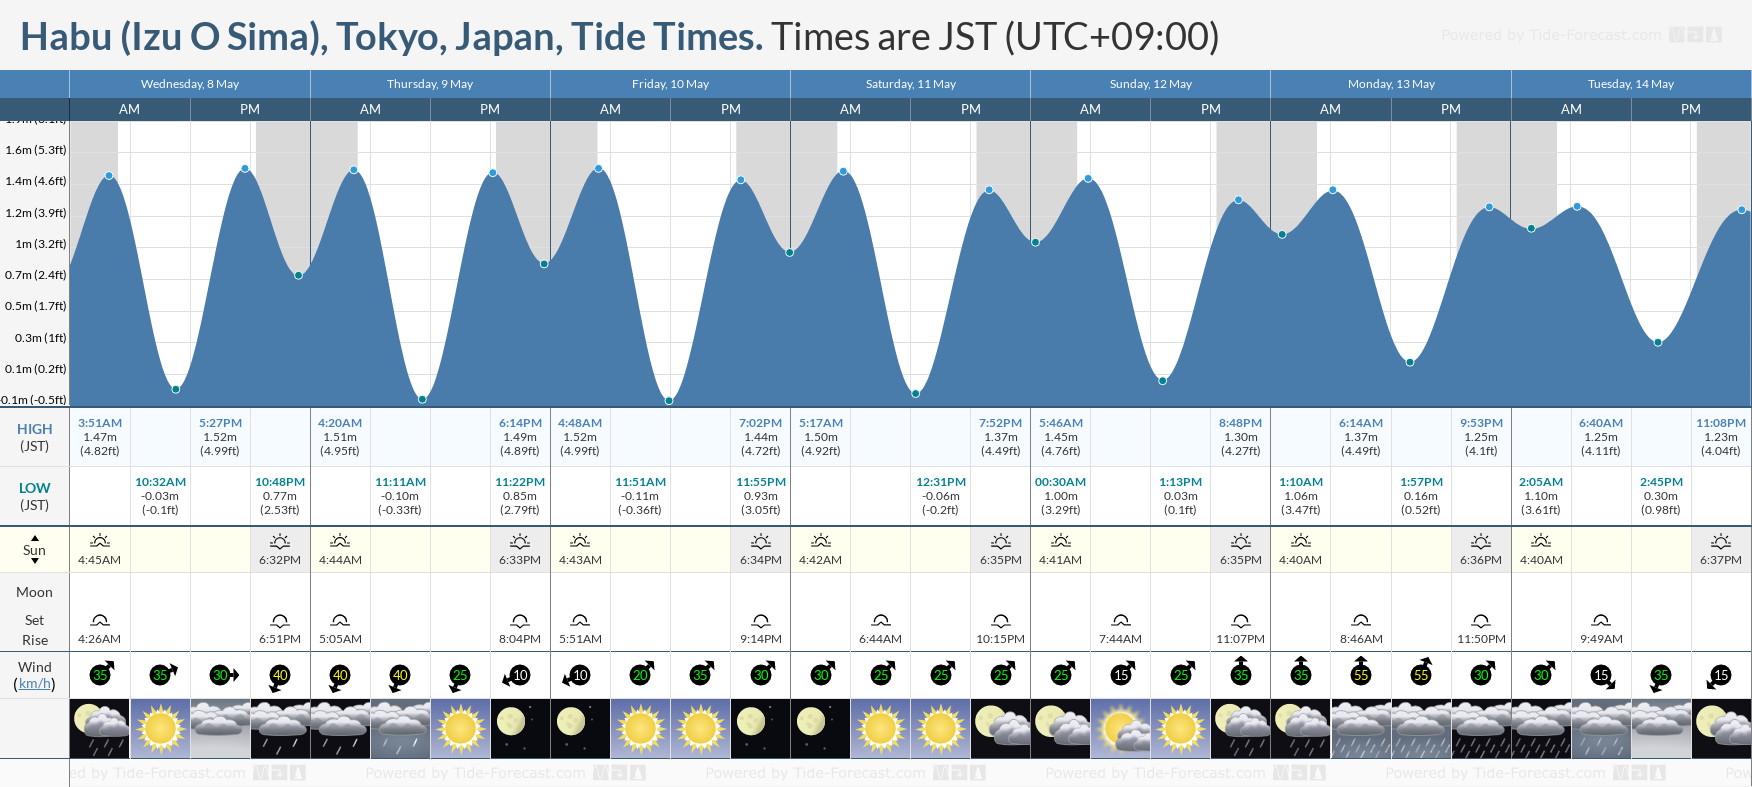 Habu (Izu O Sima), Tokyo, Japan Tide Chart including high and low tide tide times for the next 7 days